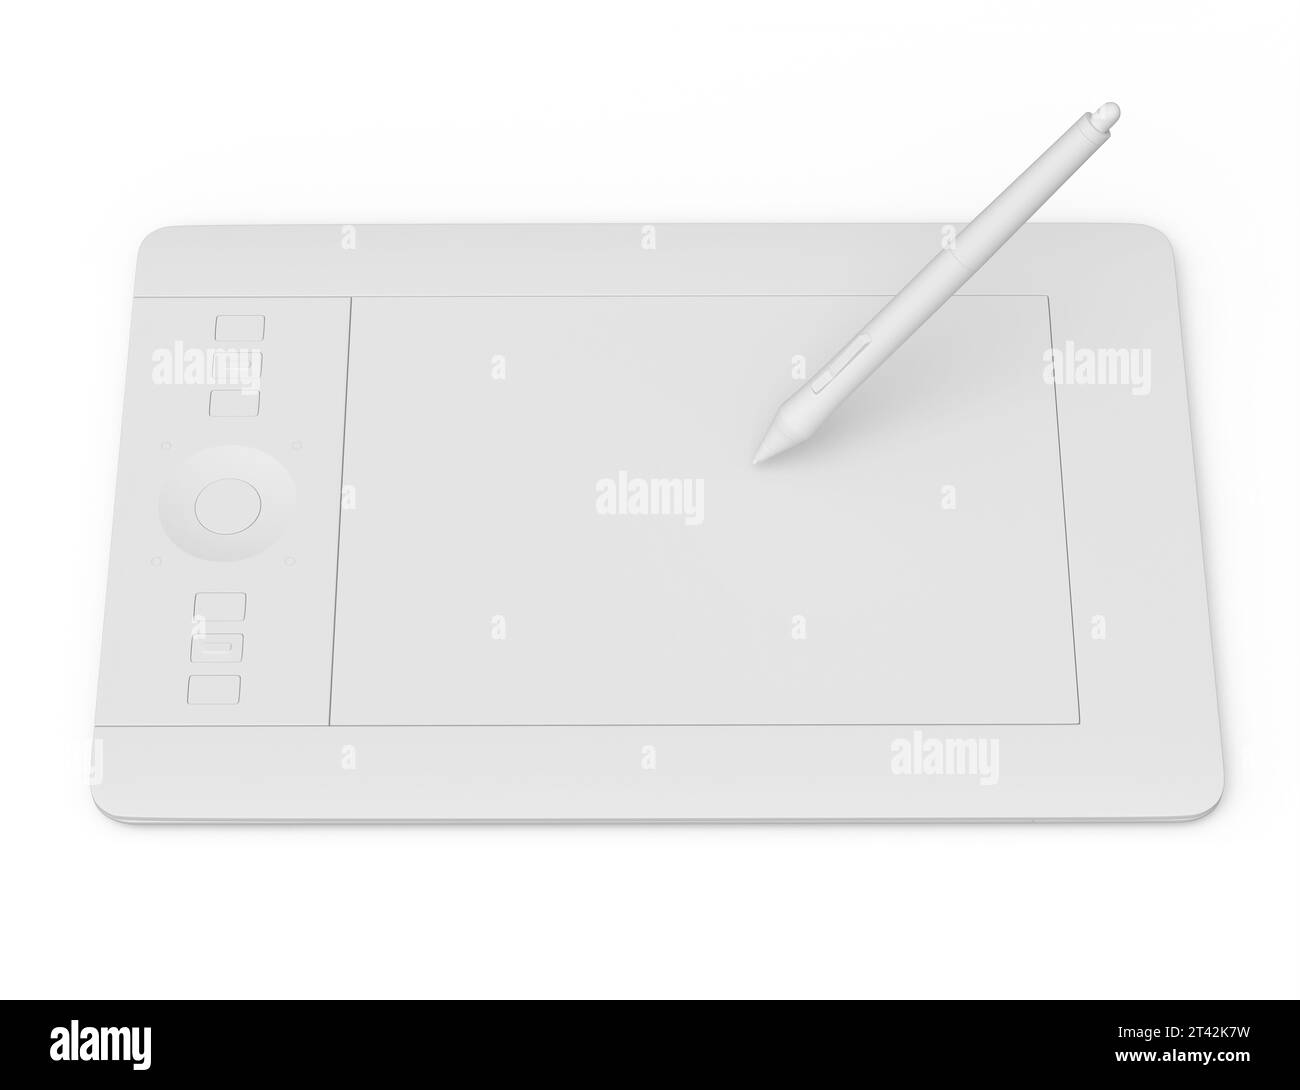 https://c8.alamy.com/comp/2T42K7W/top-view-of-graphic-tablet-and-pen-for-illustrators-designers-and-photographers-isolated-on-white-monochrome-background-3d-render-2T42K7W.jpg